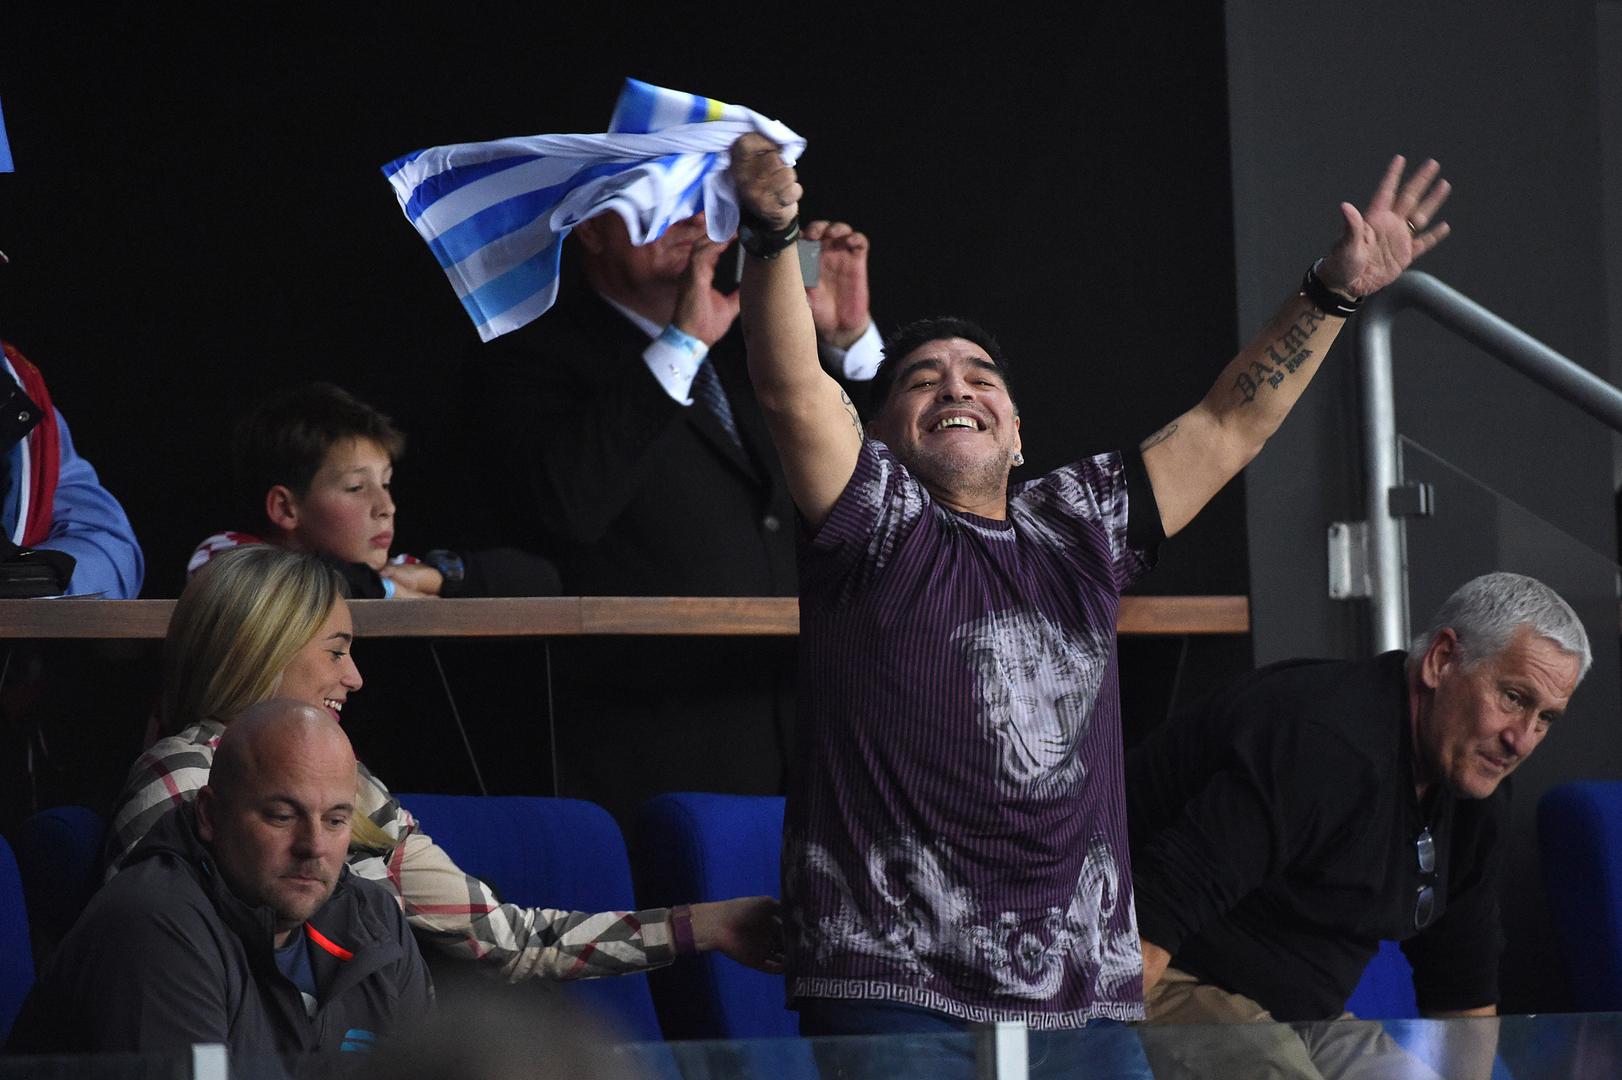 Diego Maradona At Davis Cup Final Men's Double - Zagreb Former Argentinian soccer player Diego Maradona attends the double match at the Davis Cup final tie between Croatia and Argentinia at the Arena, Zagreb, Croatia on november, 26, 2016. Photo by Corinne Dubreuil/ABACAPRESS.COM Dubreuil Corinne/ABACA /PIXSELL